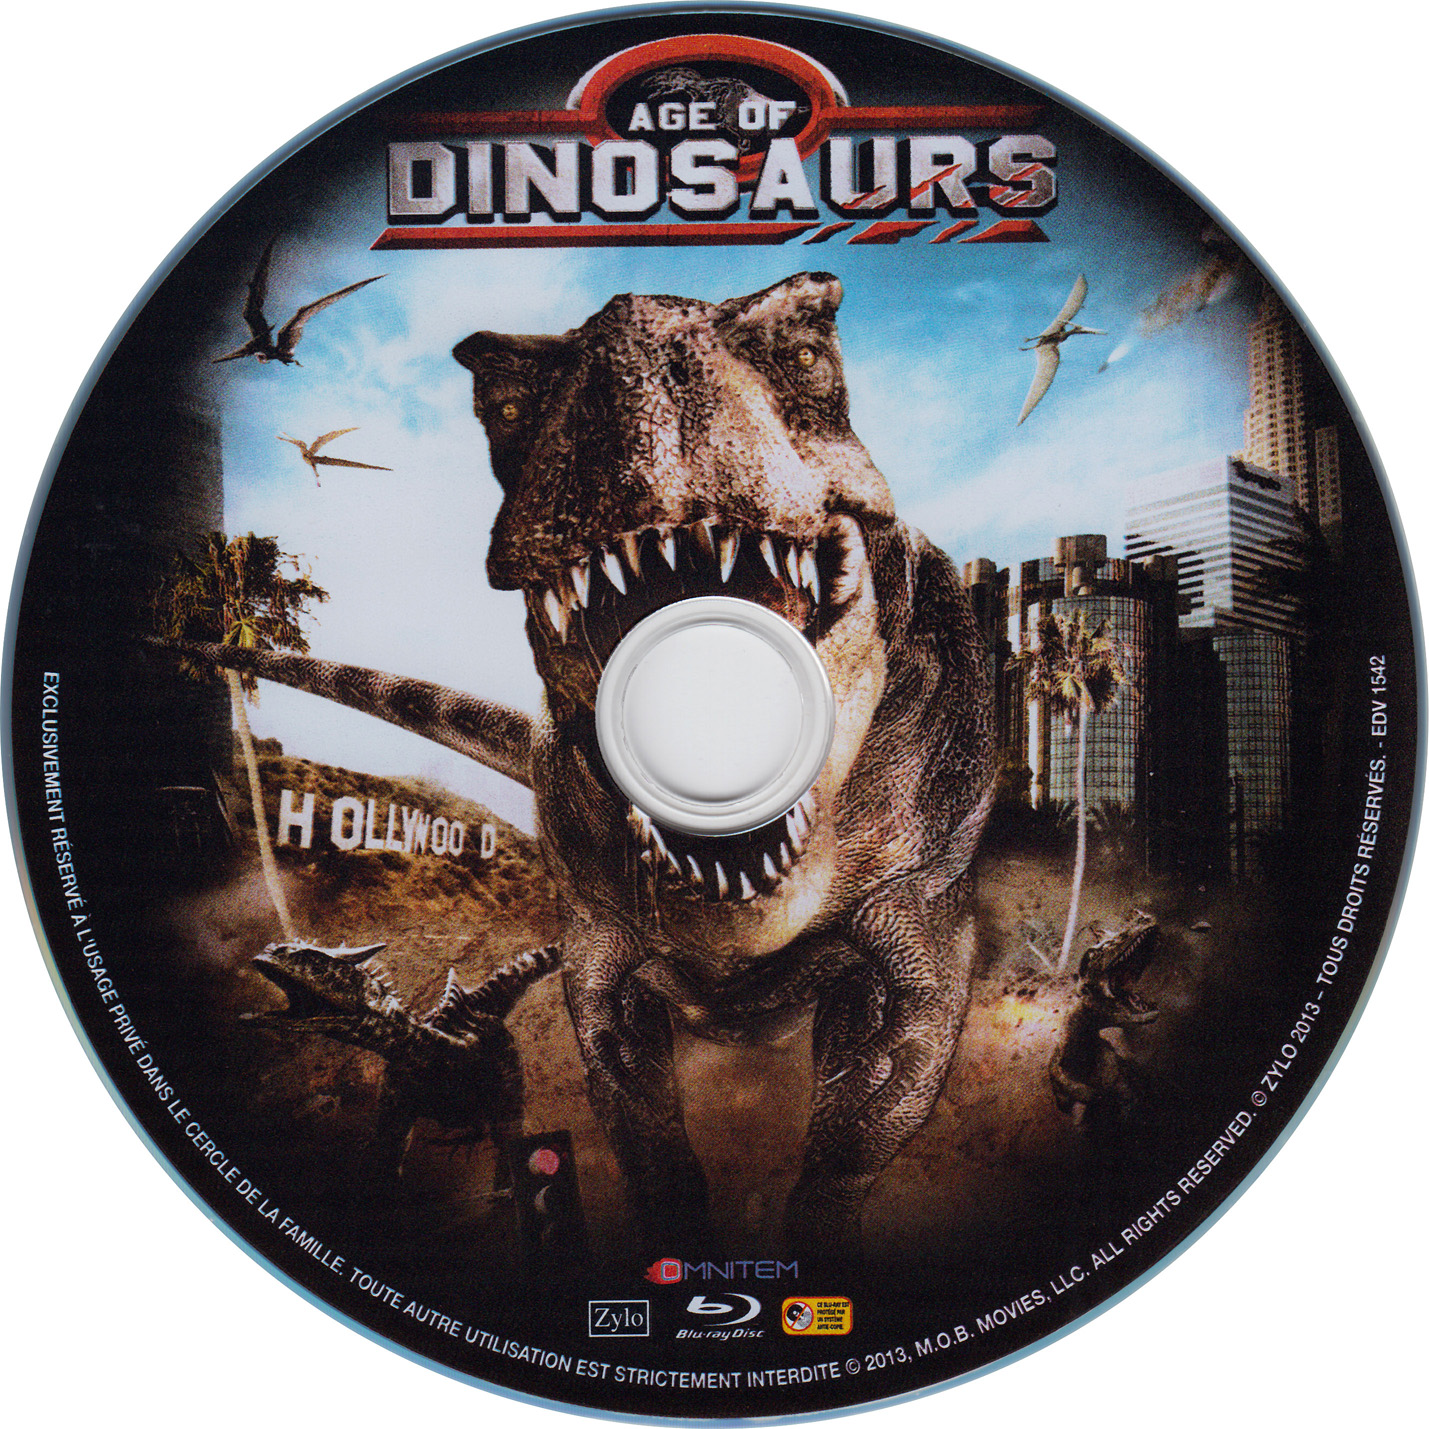 Age of dinosaurs (BLU-RAY)